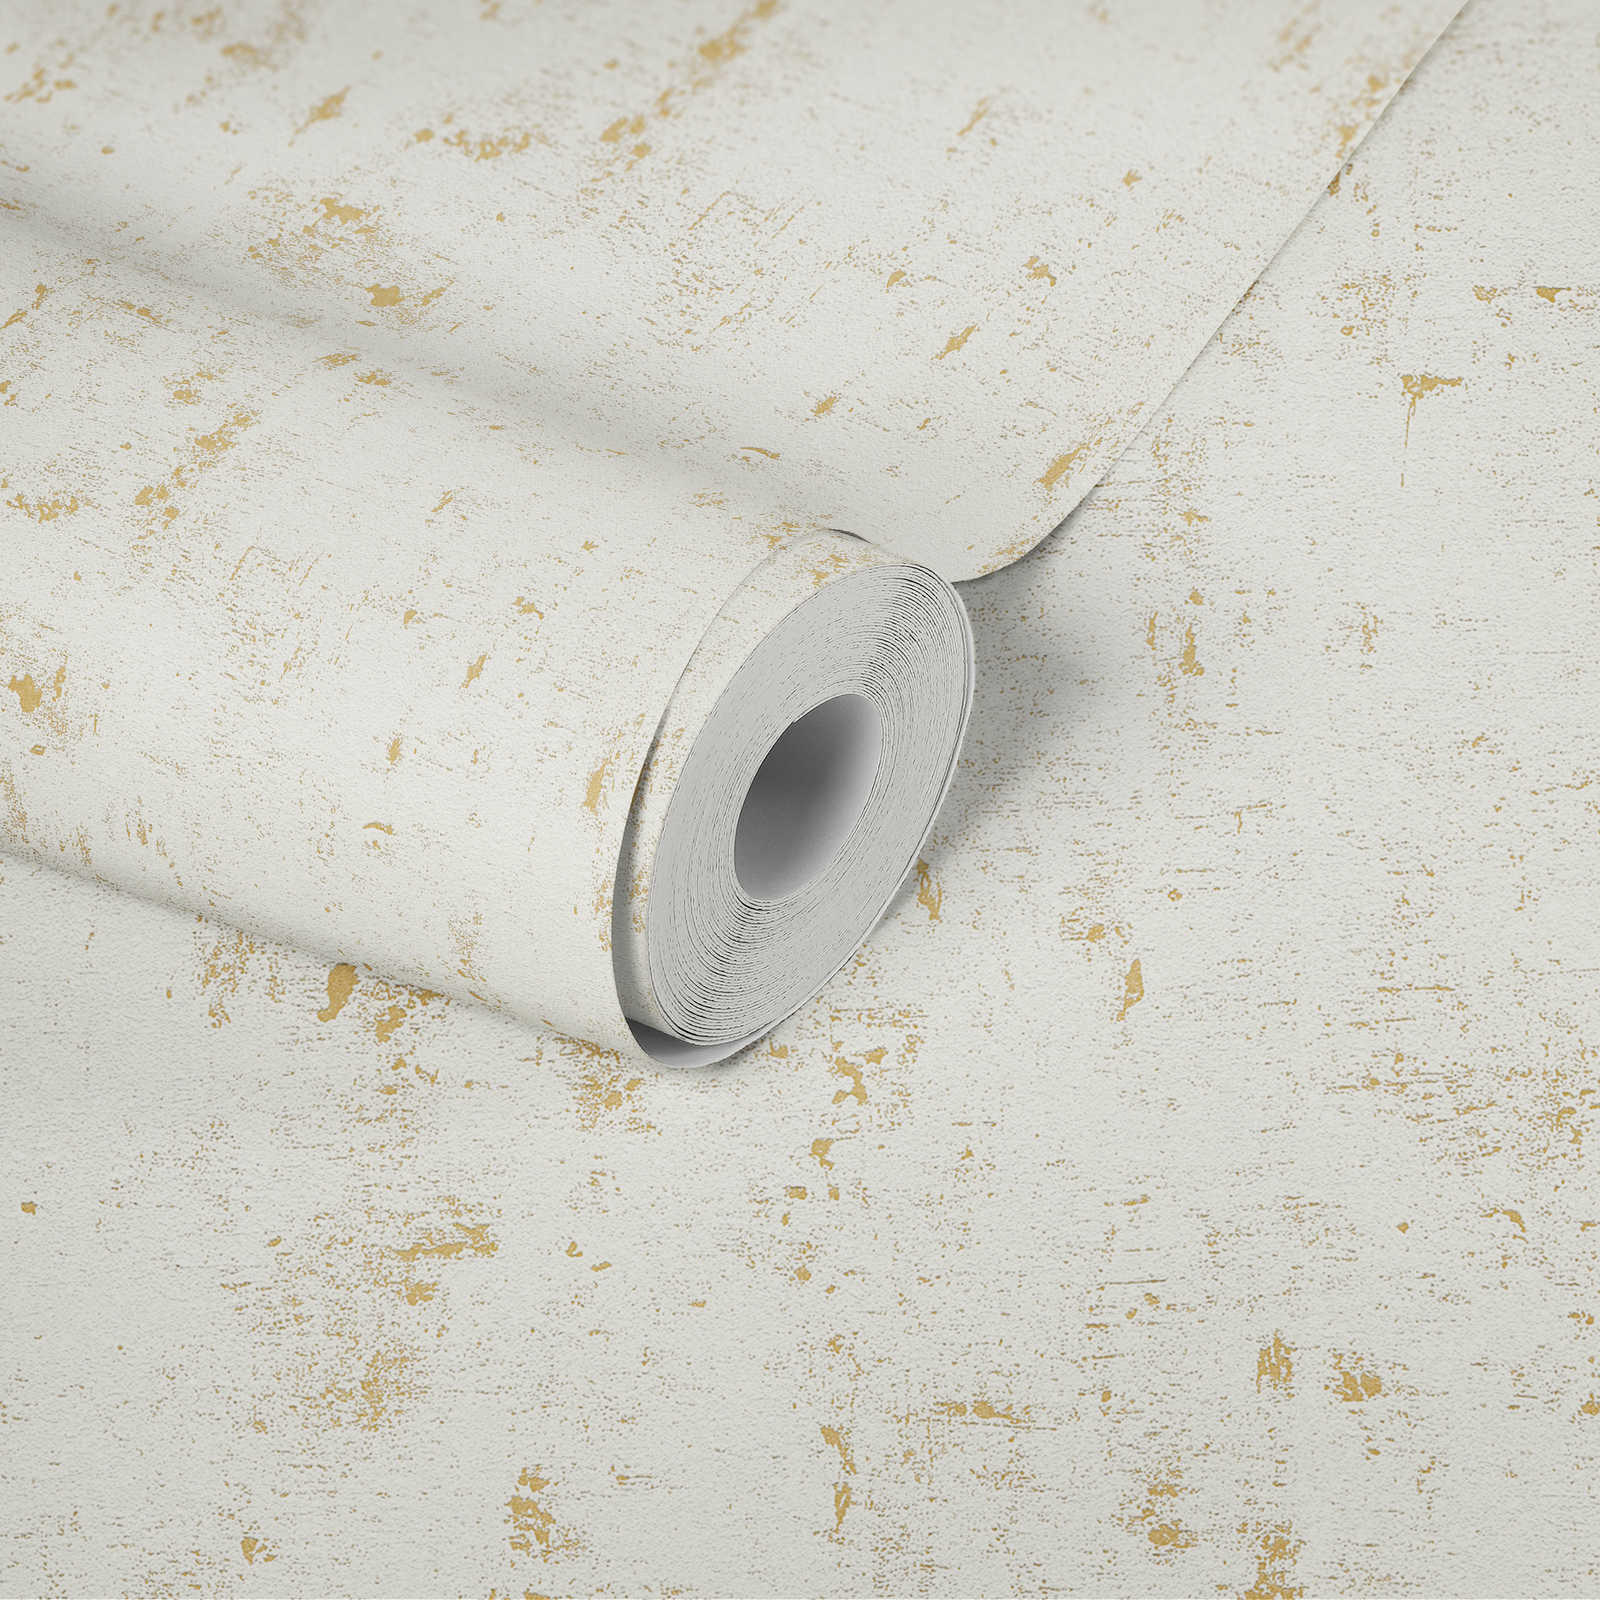             Used look wallpaper with metallic effect - cream, gold
        